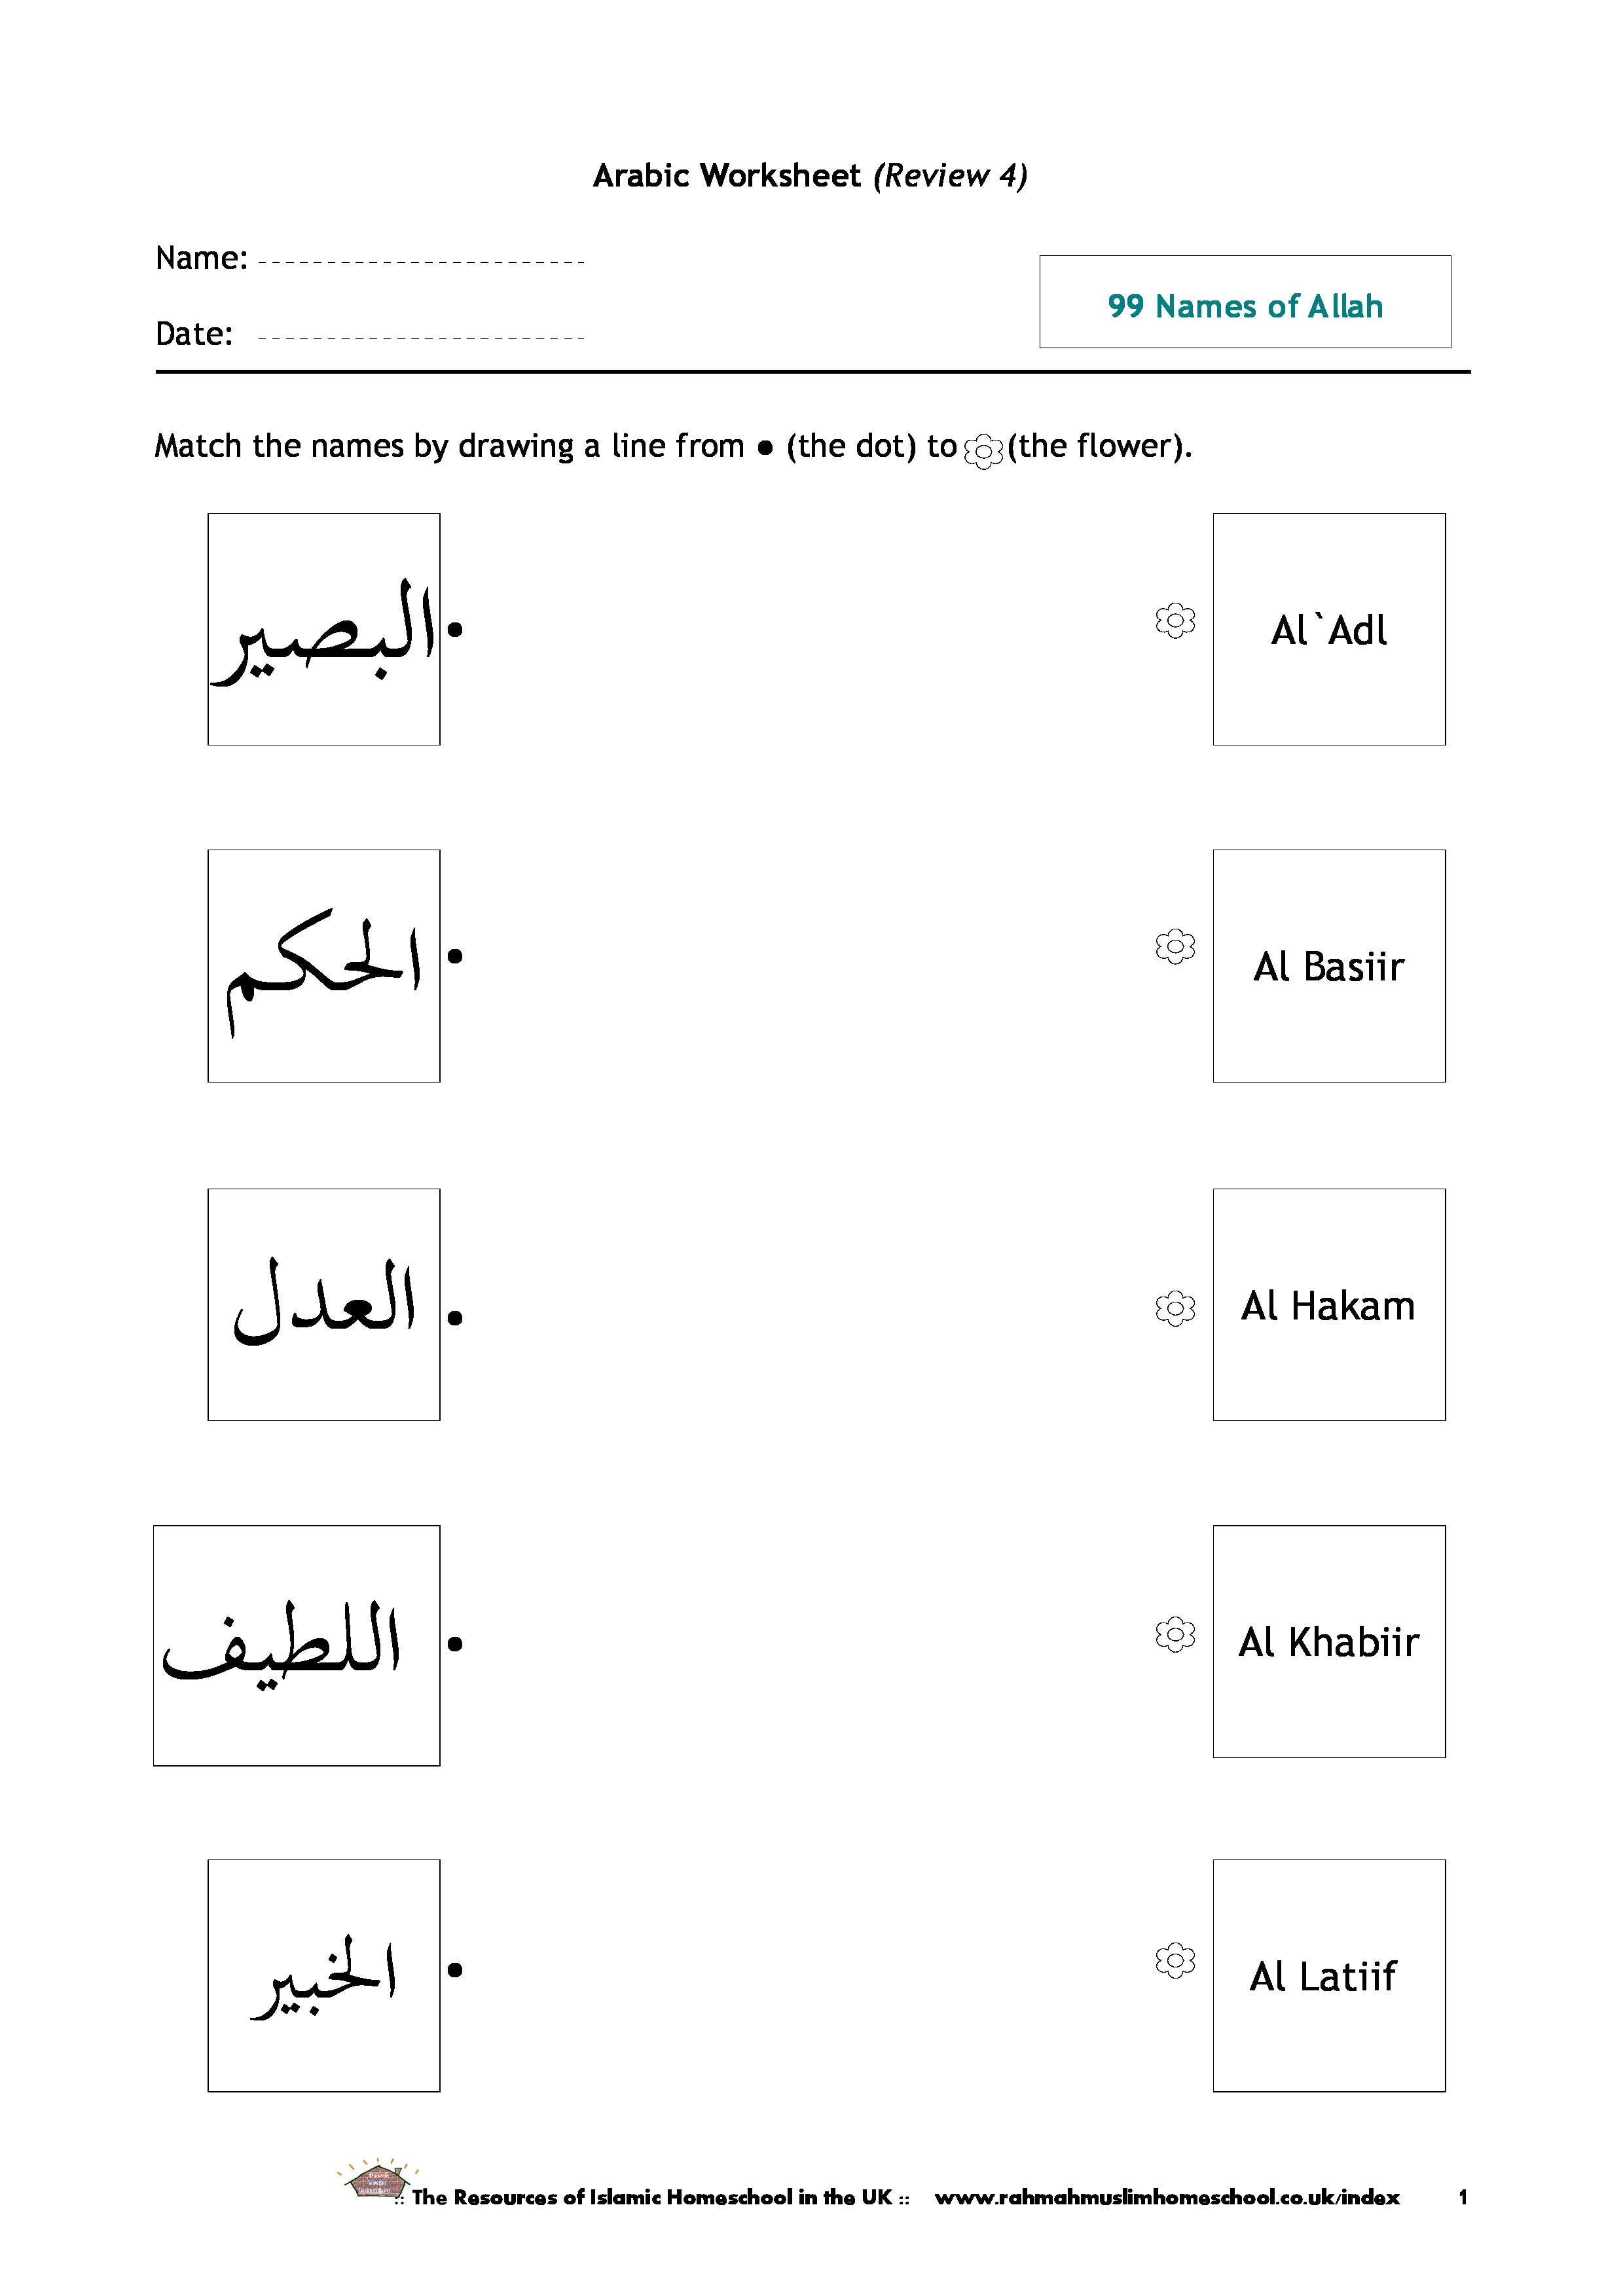 Review 4: Part 4 of the 99 Names of Allah | The Resources of Islamic